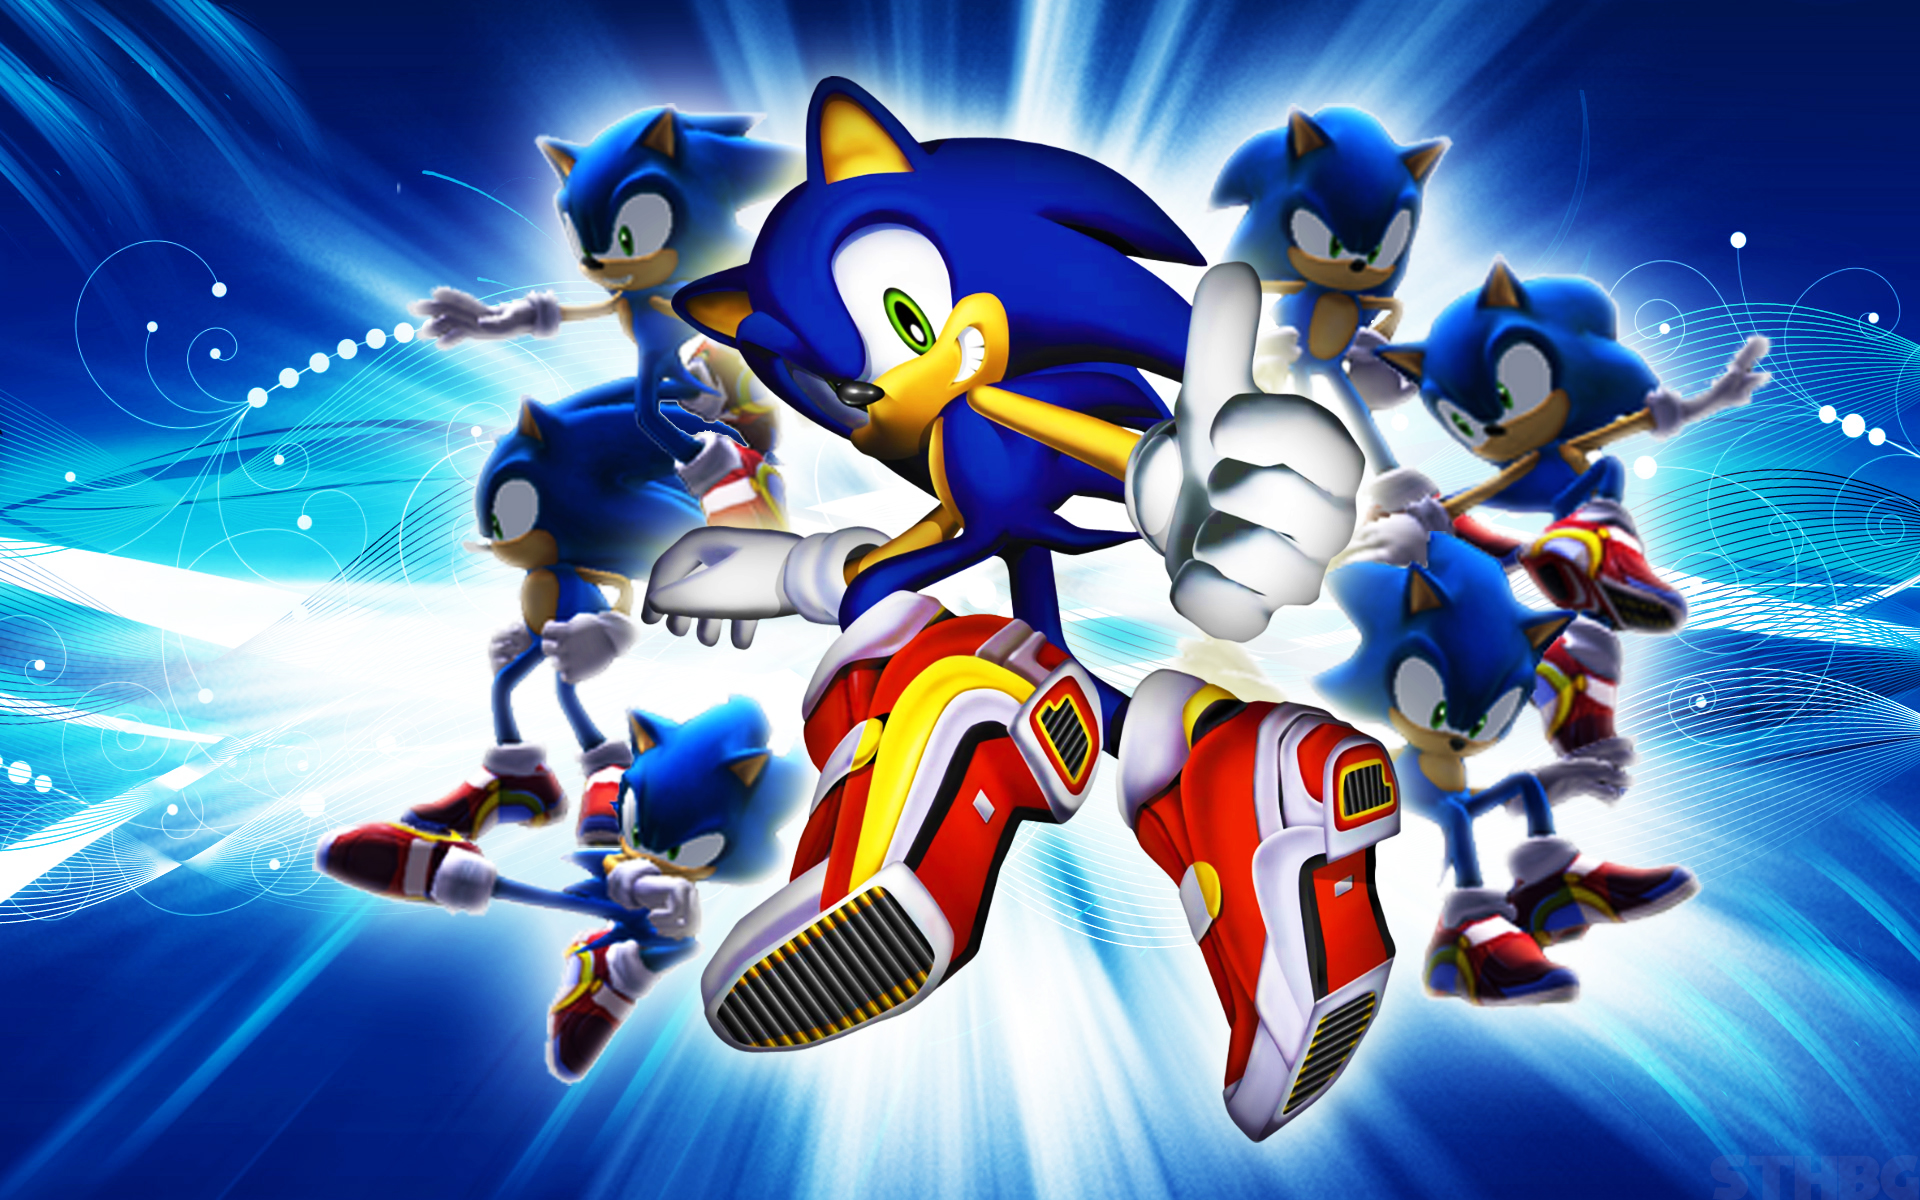 sonic adventure 2 character select mod